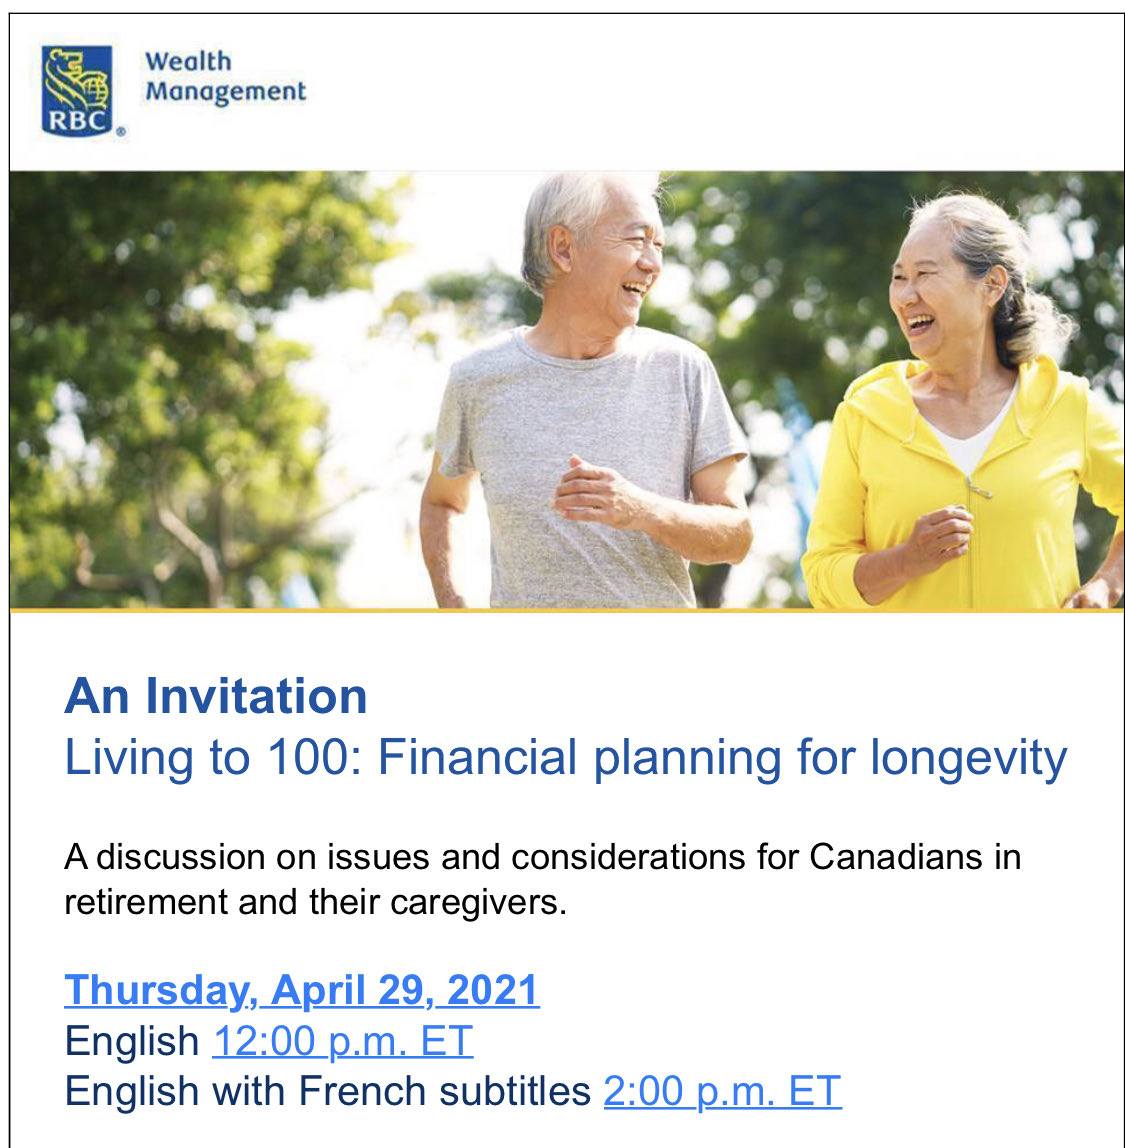 Join me for a discussion on planning for longevity in retirement, featuring ⁦⁦@RyersonNIA⁩ colleagues ⁦@ActuaryOnAgeing⁩ and Michael Nicin, and ⁦@RBCwealth⁩’s own Howard Kabot. Reach out to register!